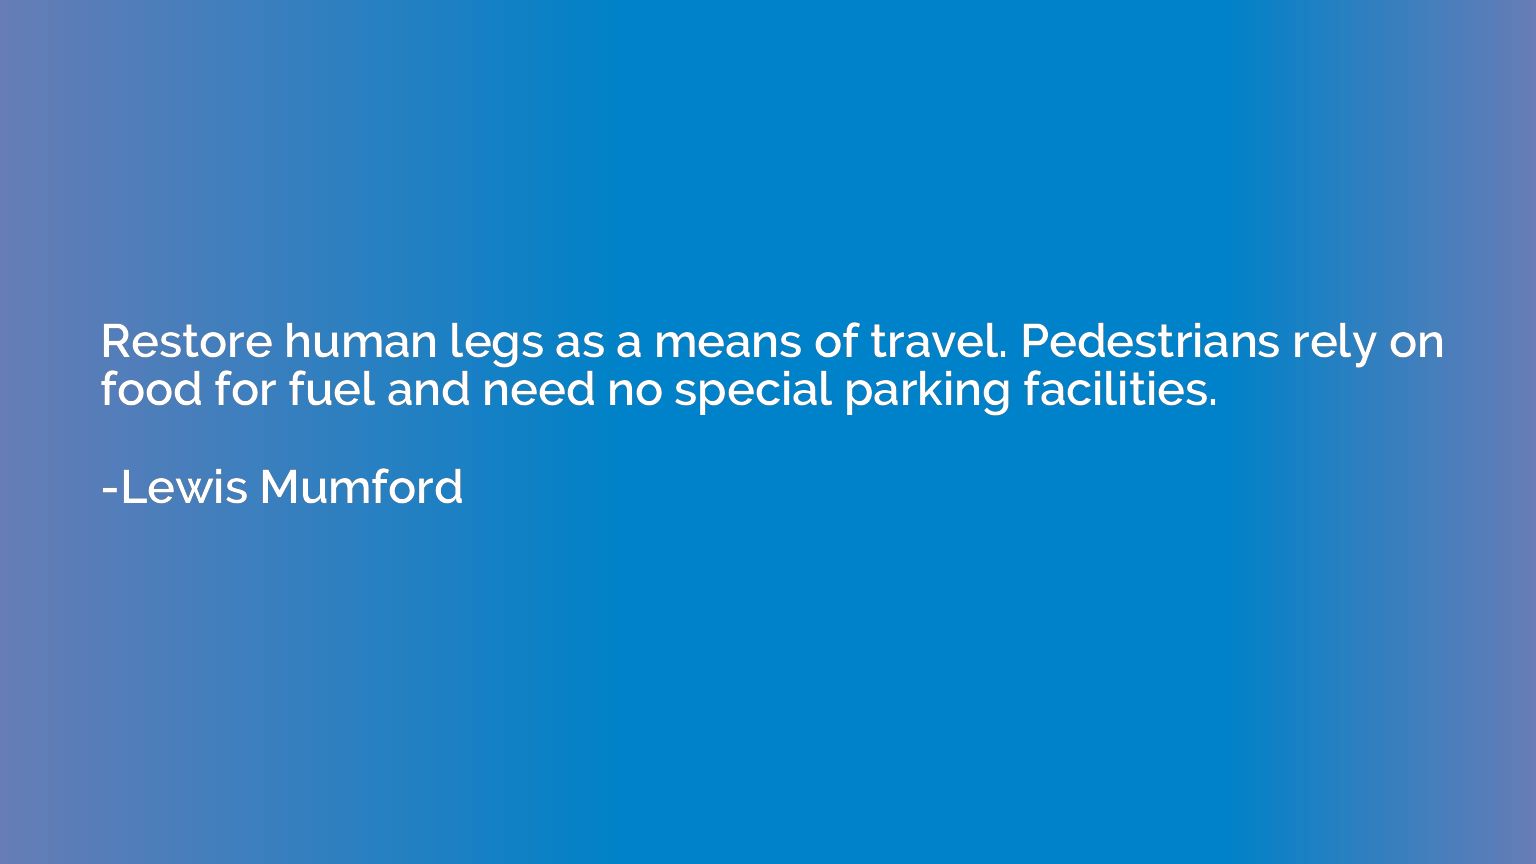 Restore human legs as a means of travel. Pedestrians rely on